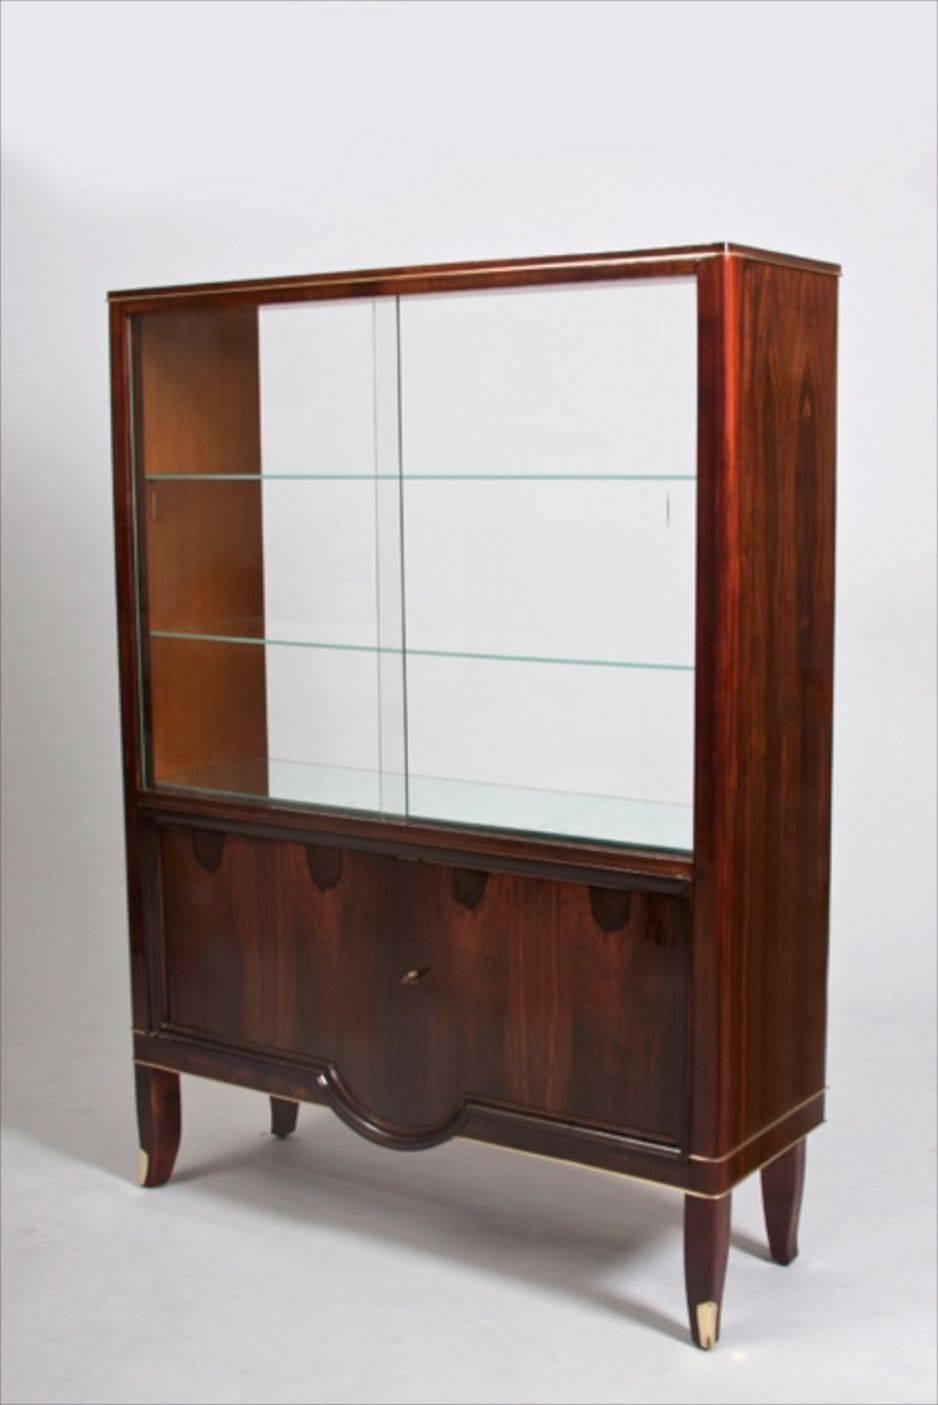 French Art Deco cabinet with vitrine. Rosewood with beveled glass sliding doors and bronze mounts, circa 1938.